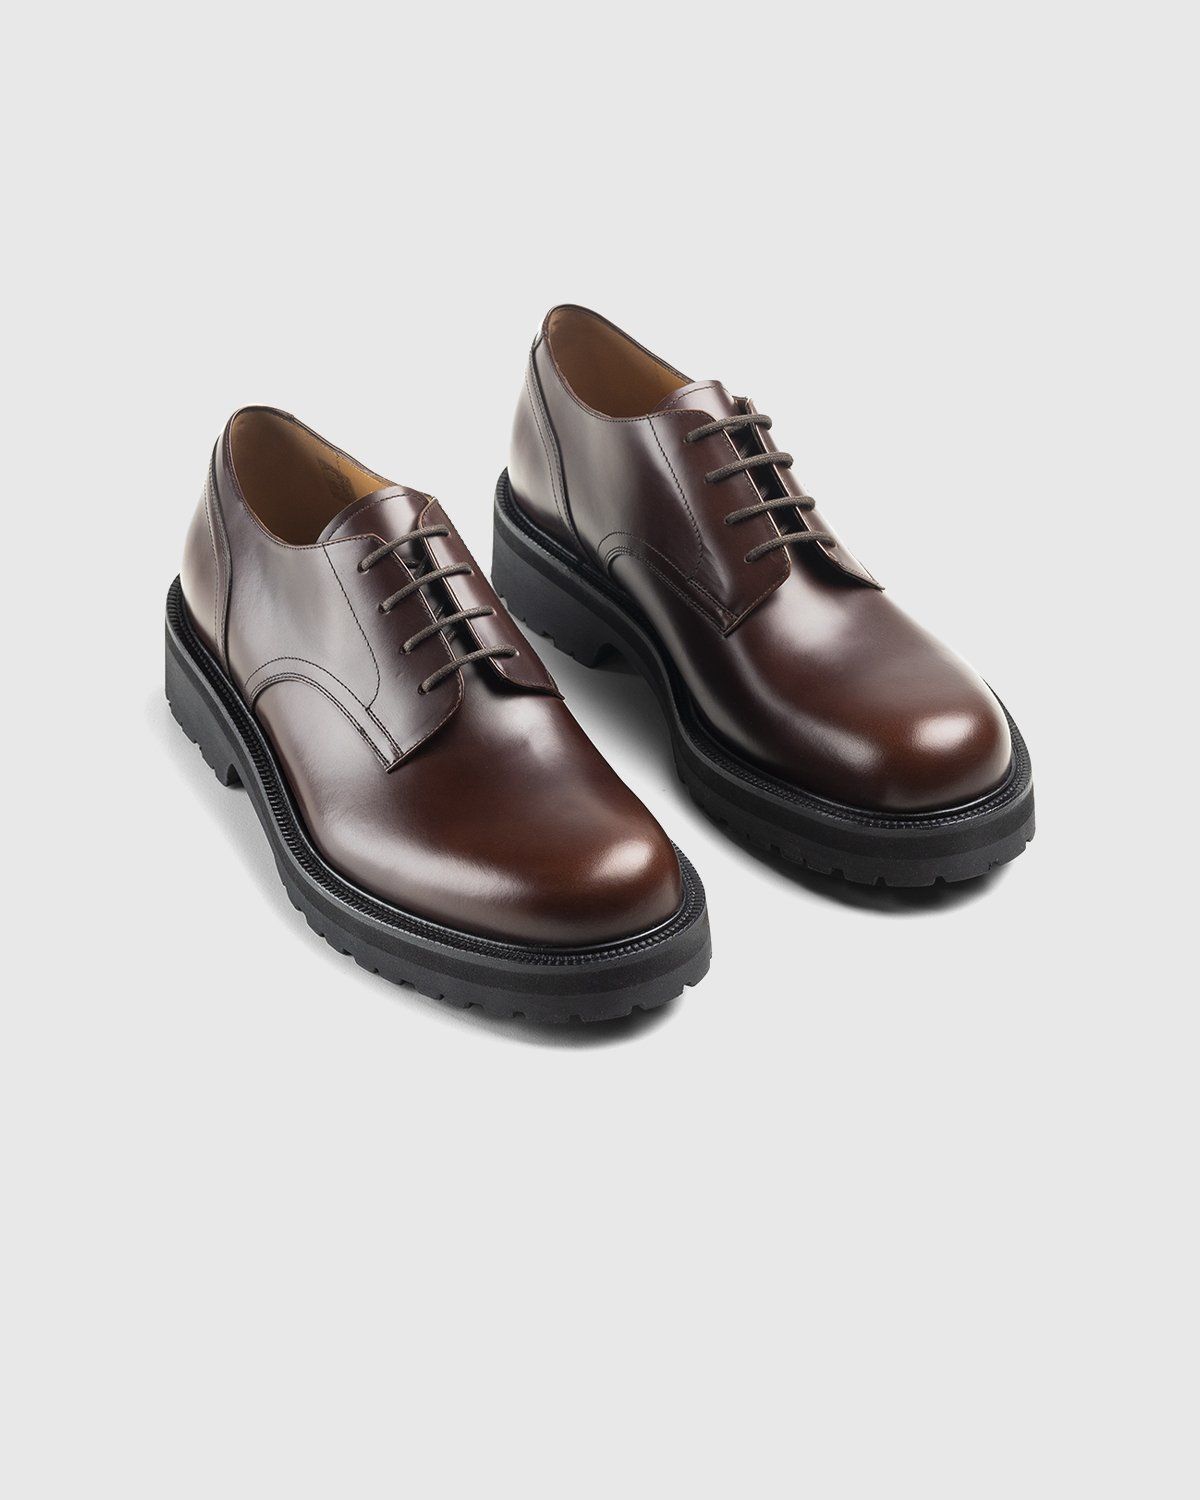 Dries Van Noten – Leather Lace-Up Derby Shoes Brown - Image 3